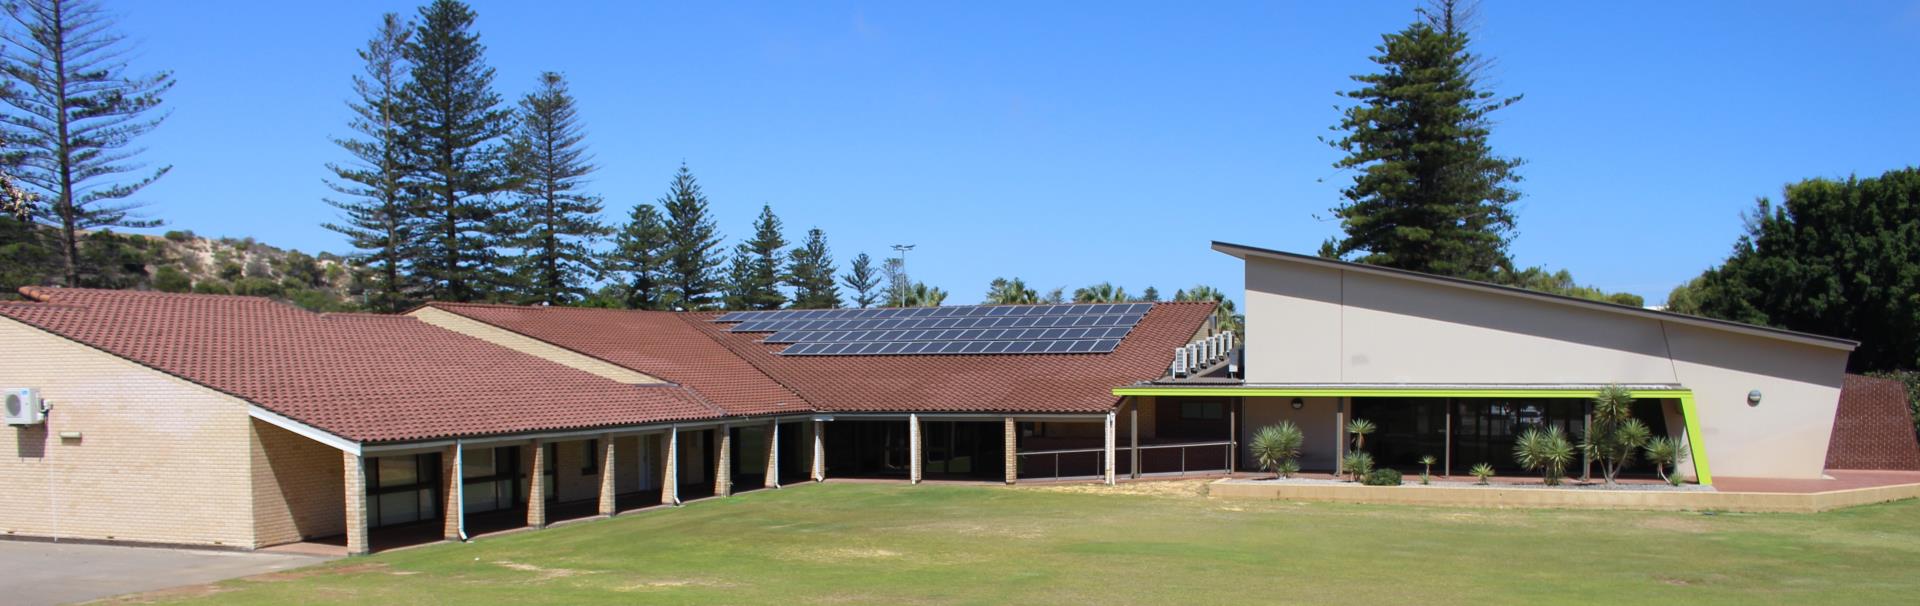 Solar panels were installed on the QEII Seniors and Community Centre in 2012.